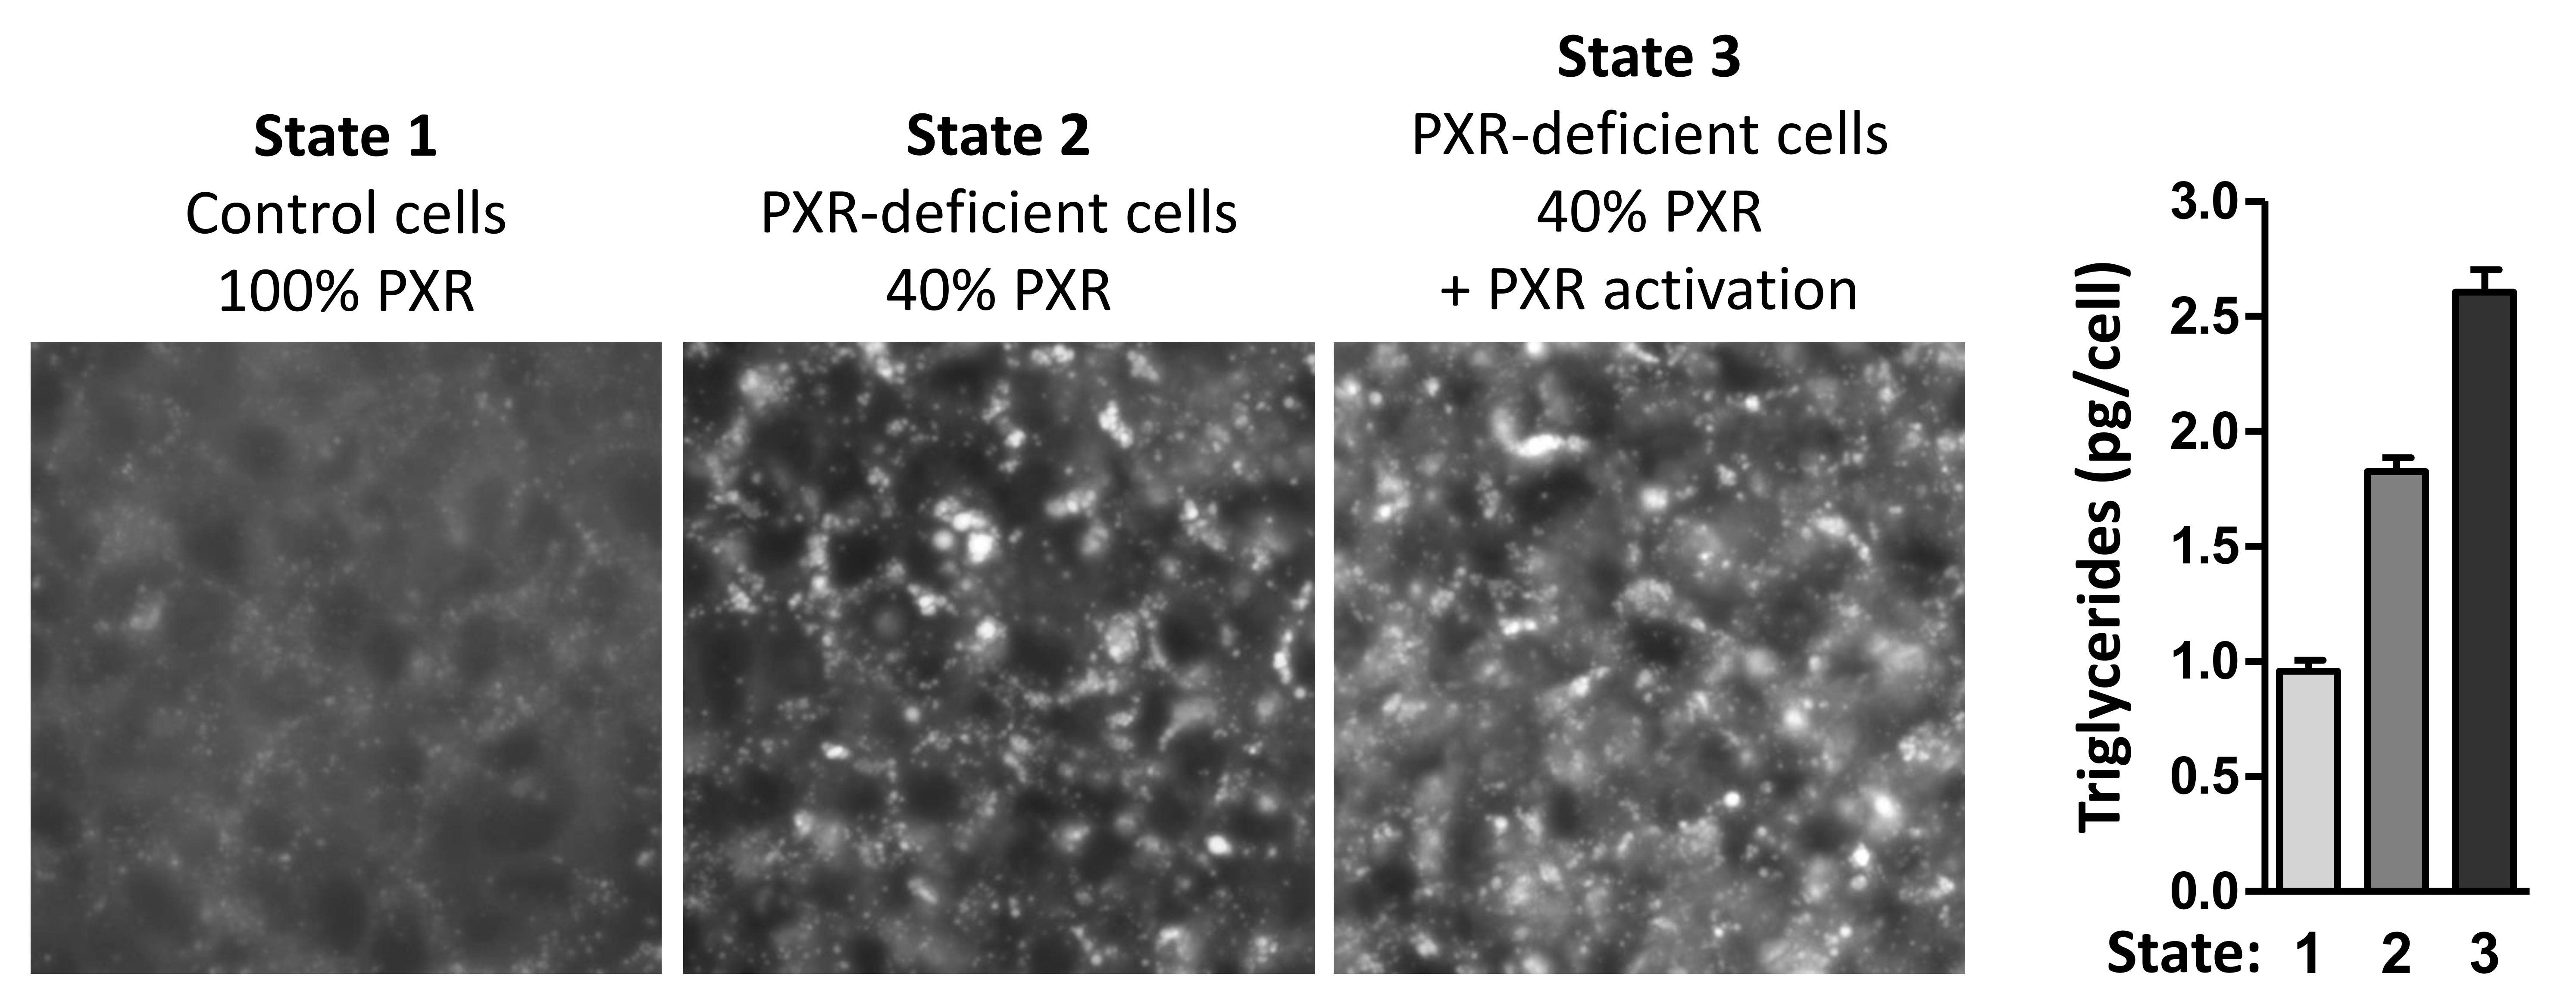 Figure 3: The combination of ligand-mediated PXR activation and PXR deficiency leads to the highest achievable hepatic steatosis. (for more details, see above)